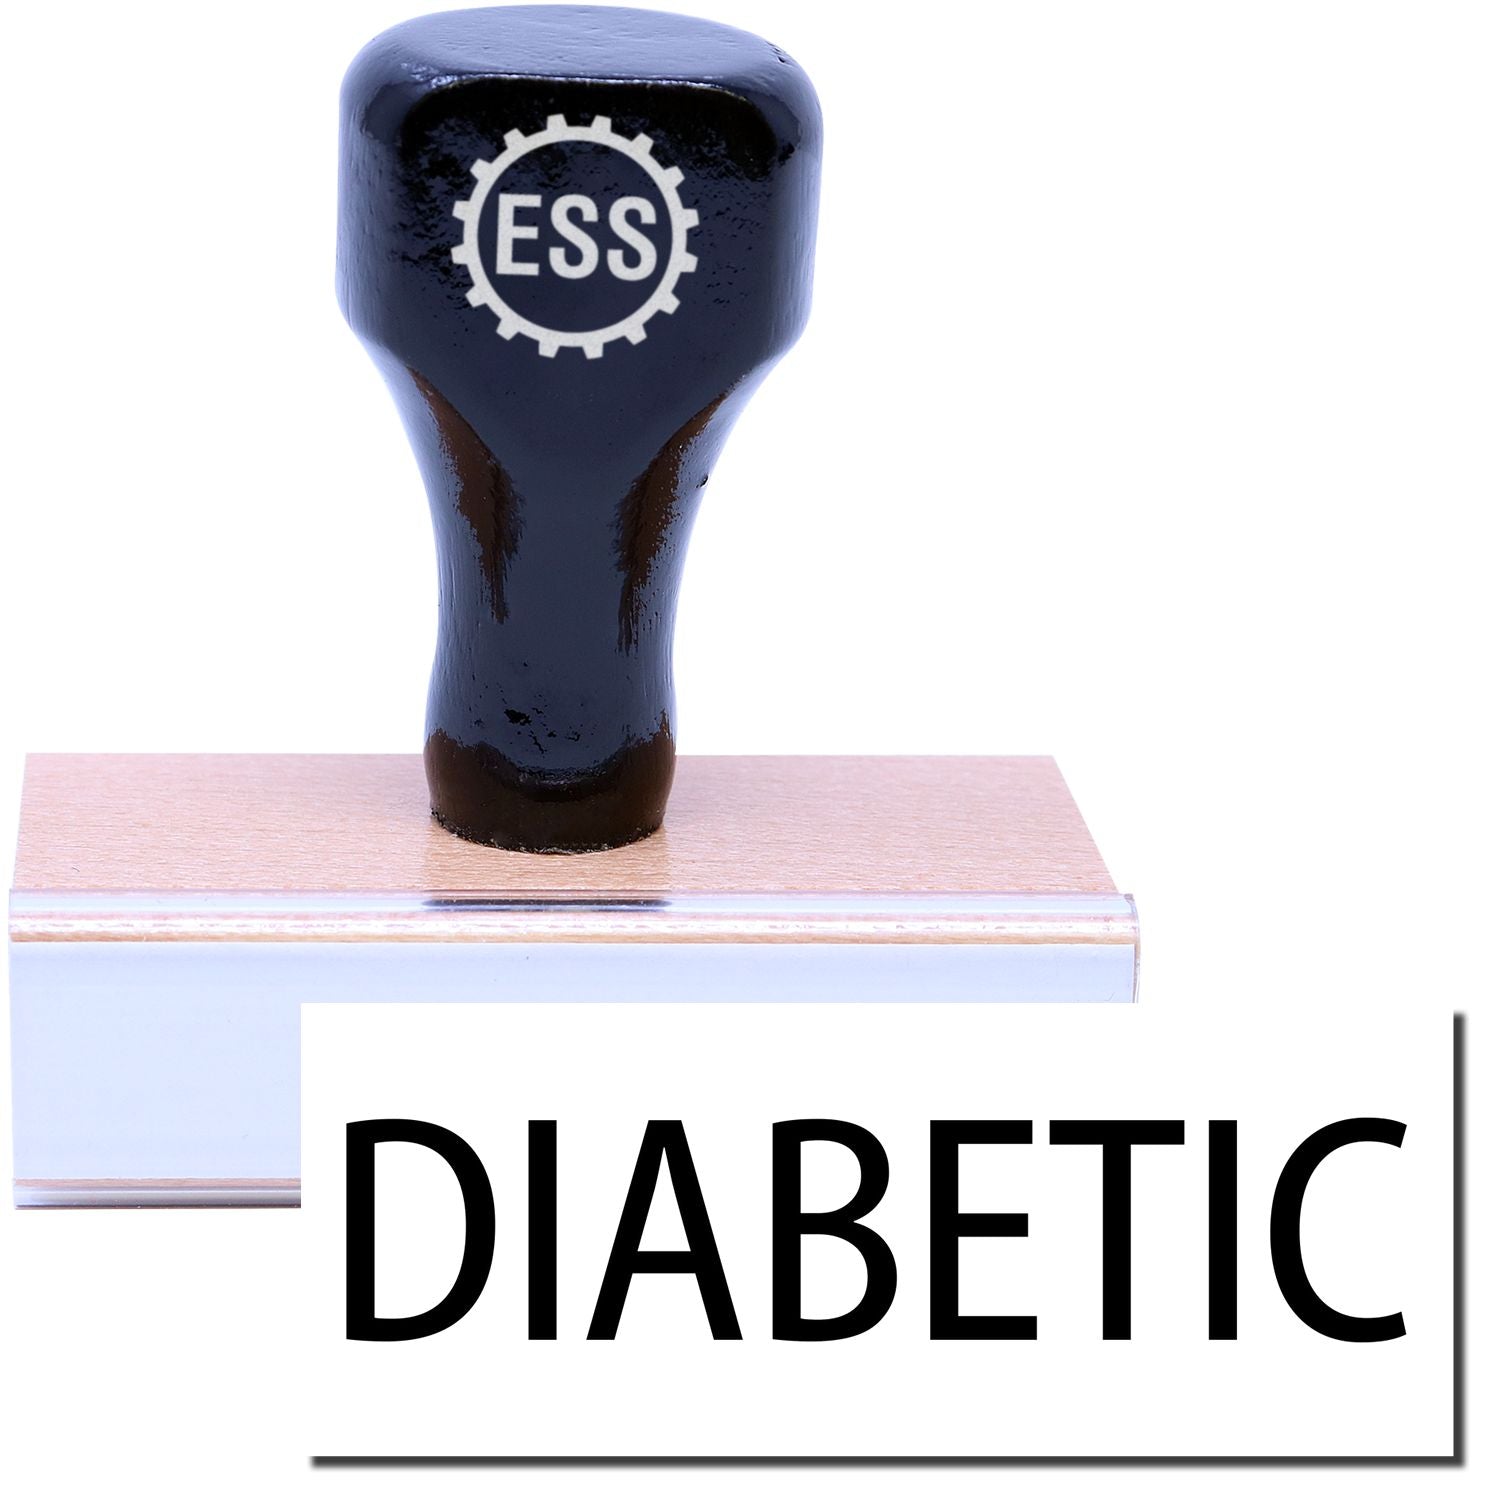 A stock office medical rubber stamp with a stamped image showing how the text "DIABETIC" is displayed after stamping.